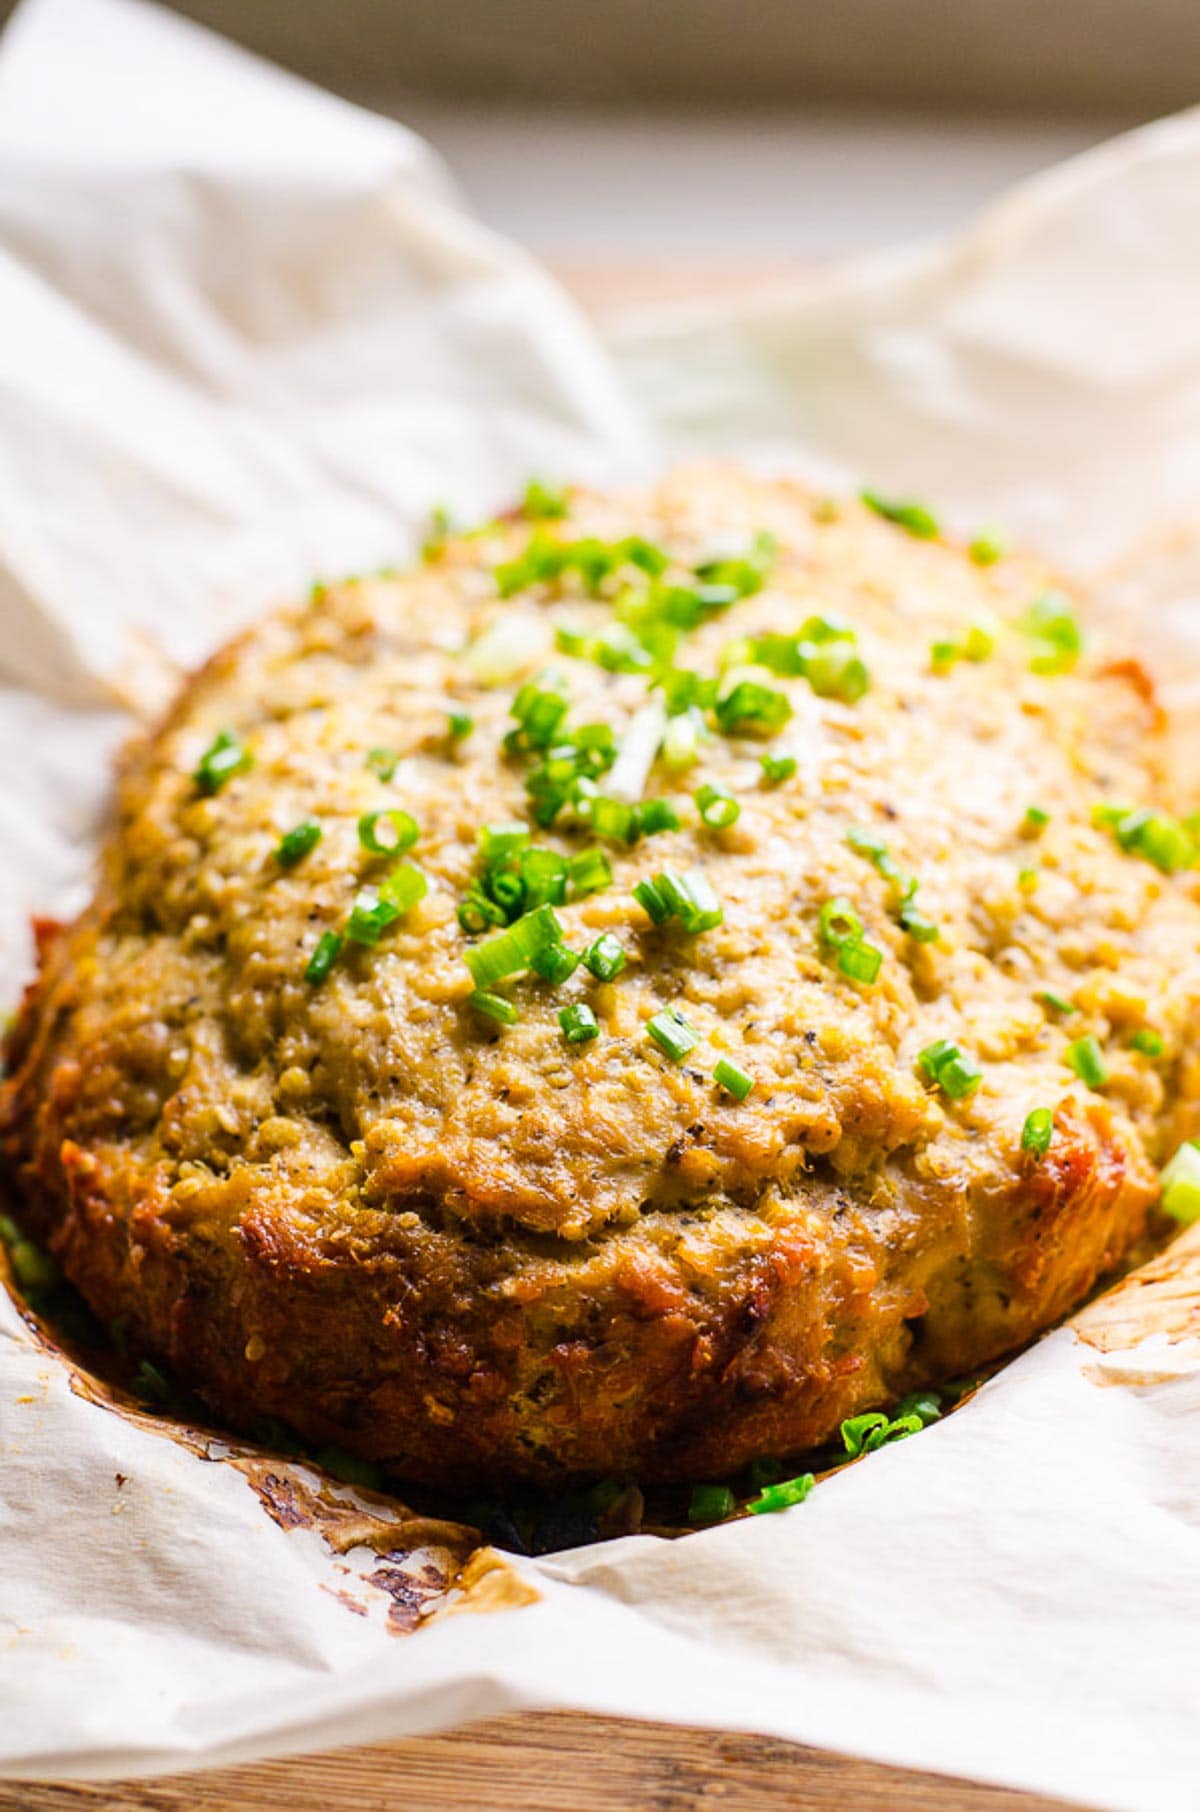 Cooked crockpot turkey meatloaf on parchment paper garnished with green onion.